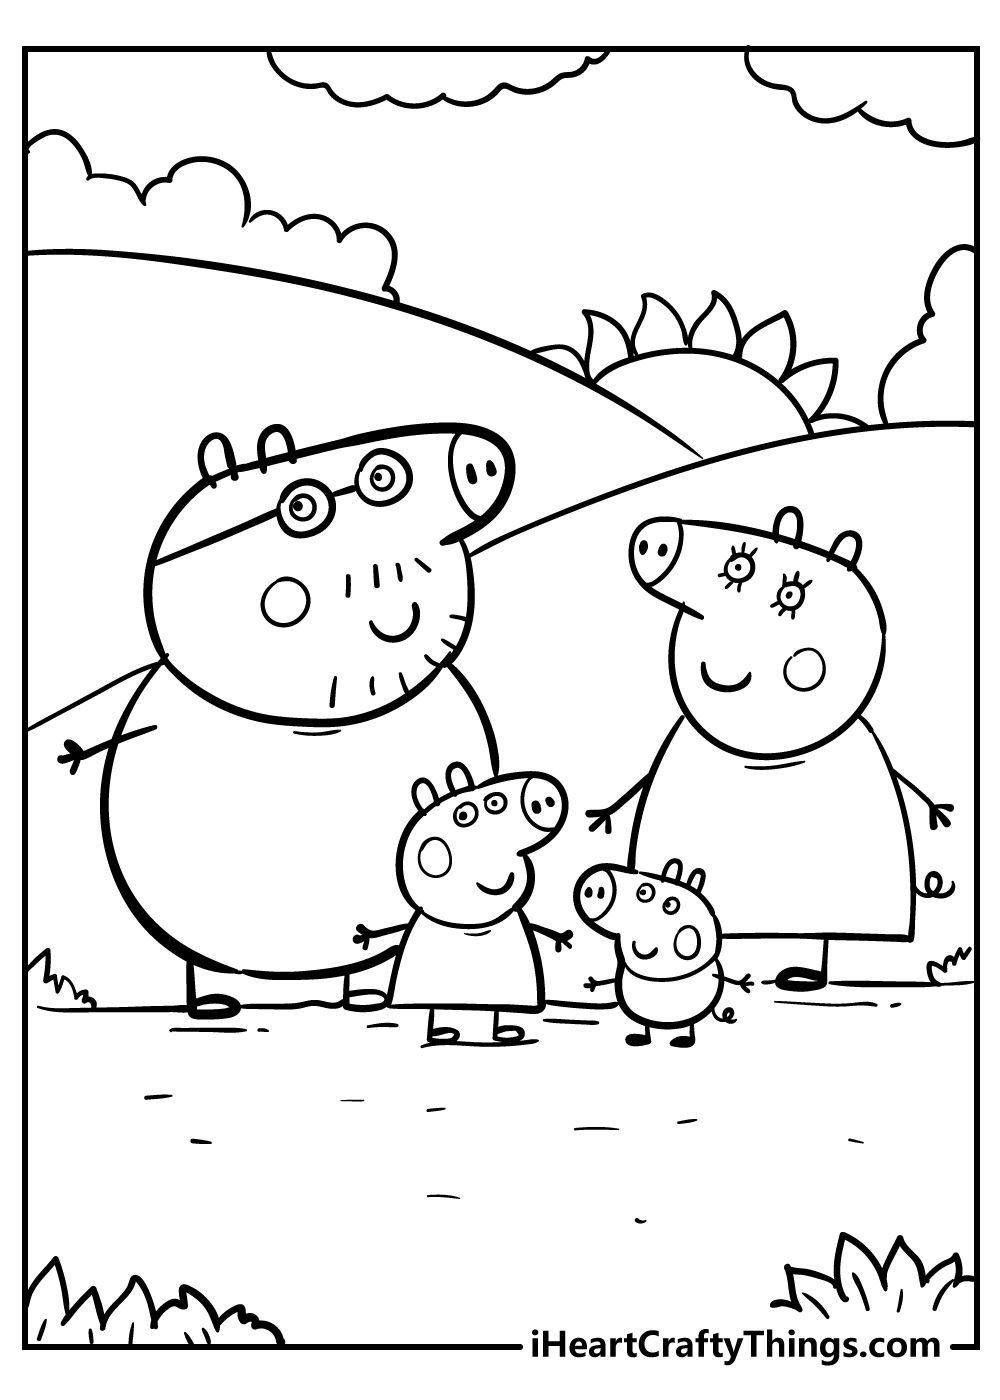 PERFECT FOR TRAVEL/HOLS BRAND NEW PEPPA PIG COLOURING SHEETS & CHUNKY CRAYONS 